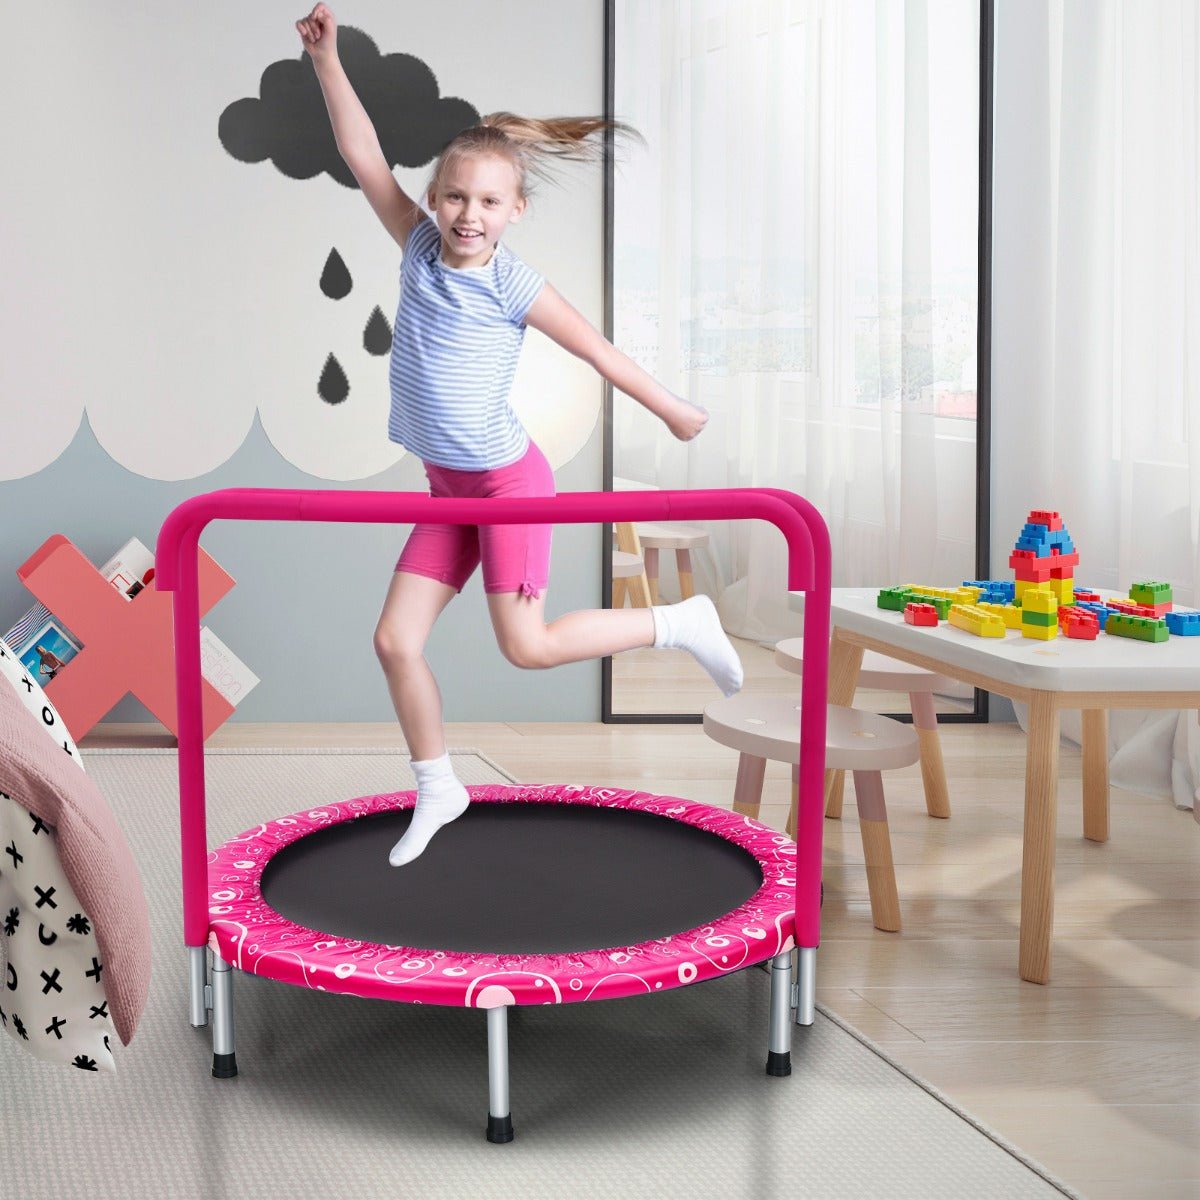 Bounce with Joy: Foldable Kids Trampoline with Handle for Indoor & Outdoor Pink